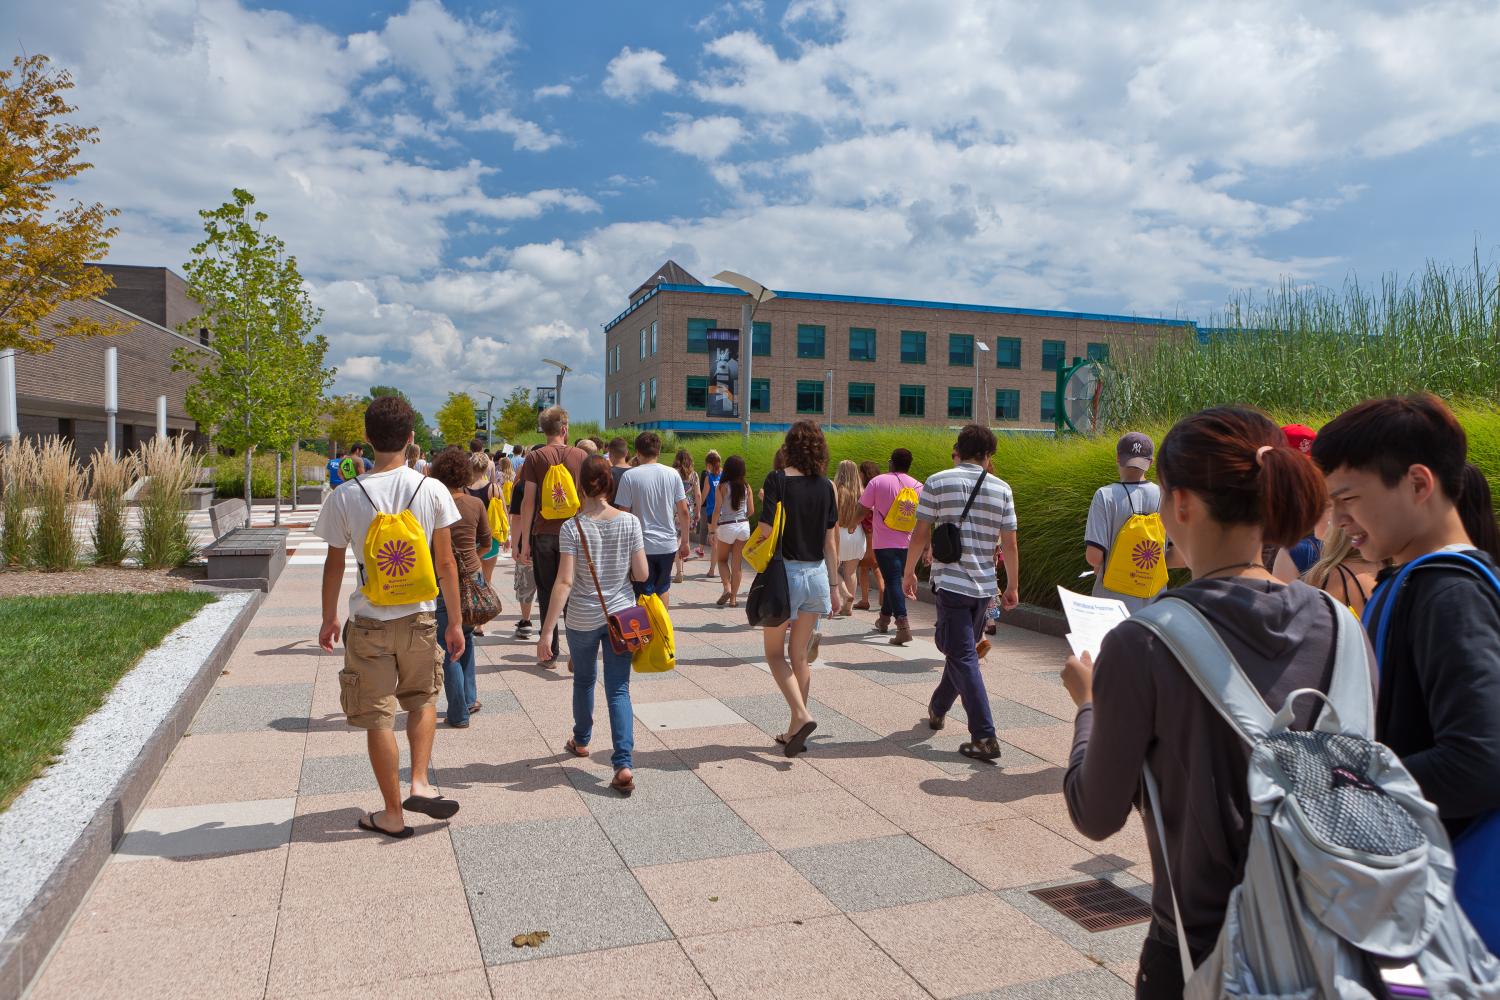 Walking around together, new college students take a tour of their schools campus. Tours and orientations help students get ready for their college experience.